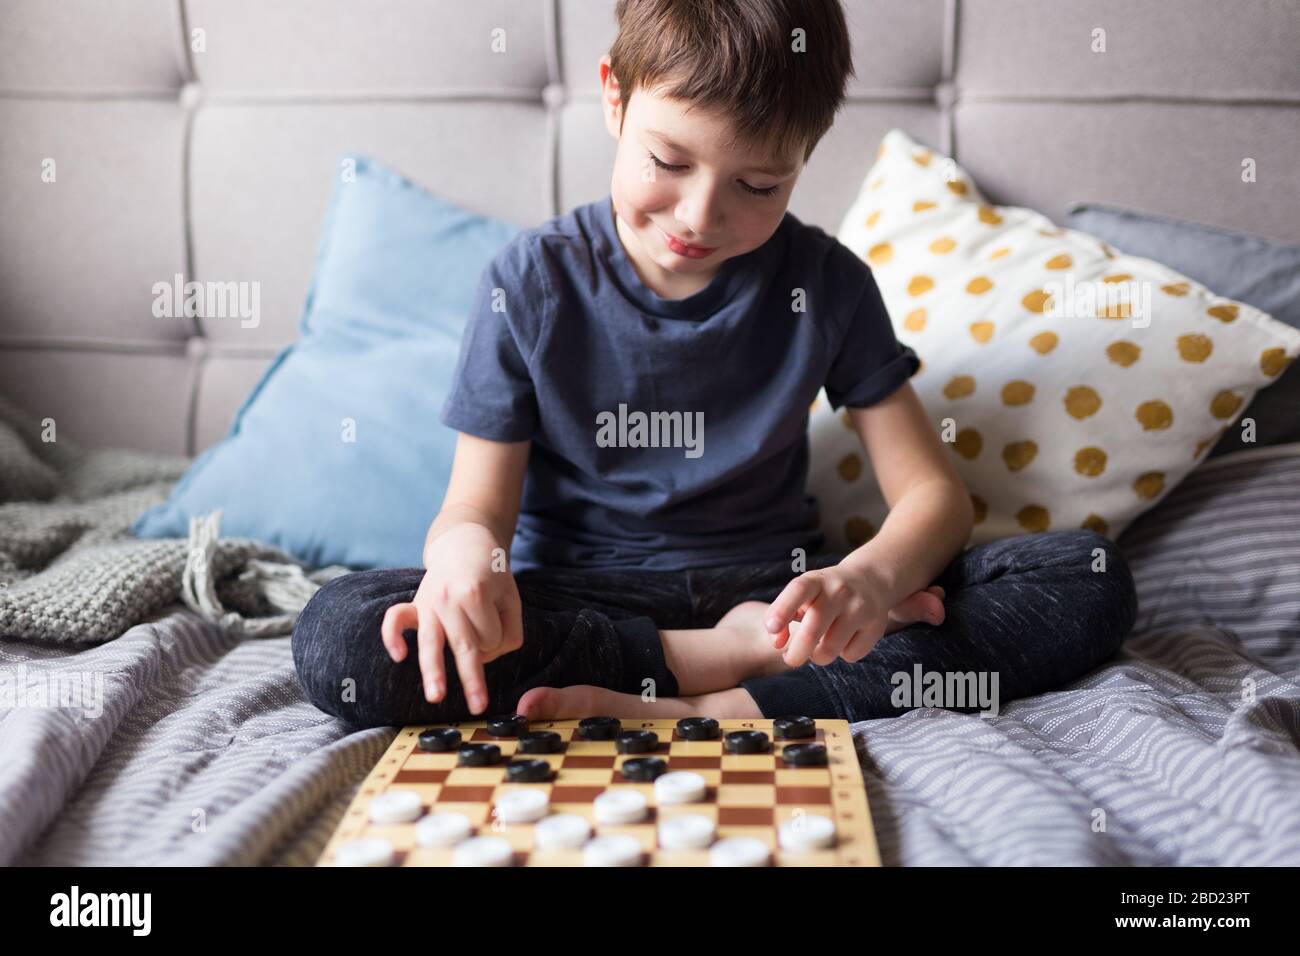 Young kid hands playing checkers table game on bed. Stay at home Quarantine concept. Board game and kids leisure concept. Family time.  Stock Photo